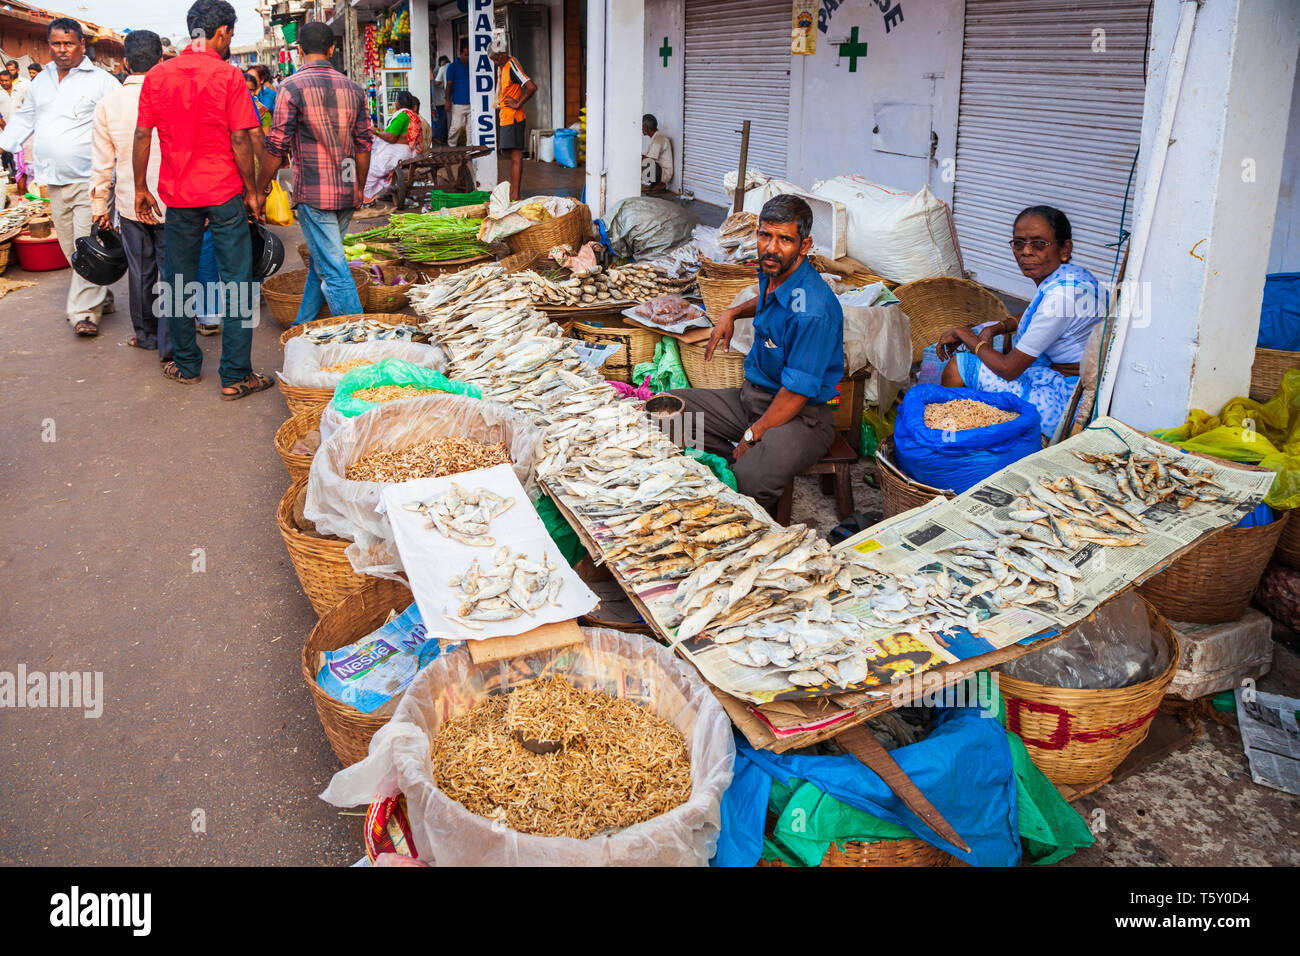 GOA, INDIA - APRIL 06, 2012: Fish and vegetables at the local market in India Stock Photo